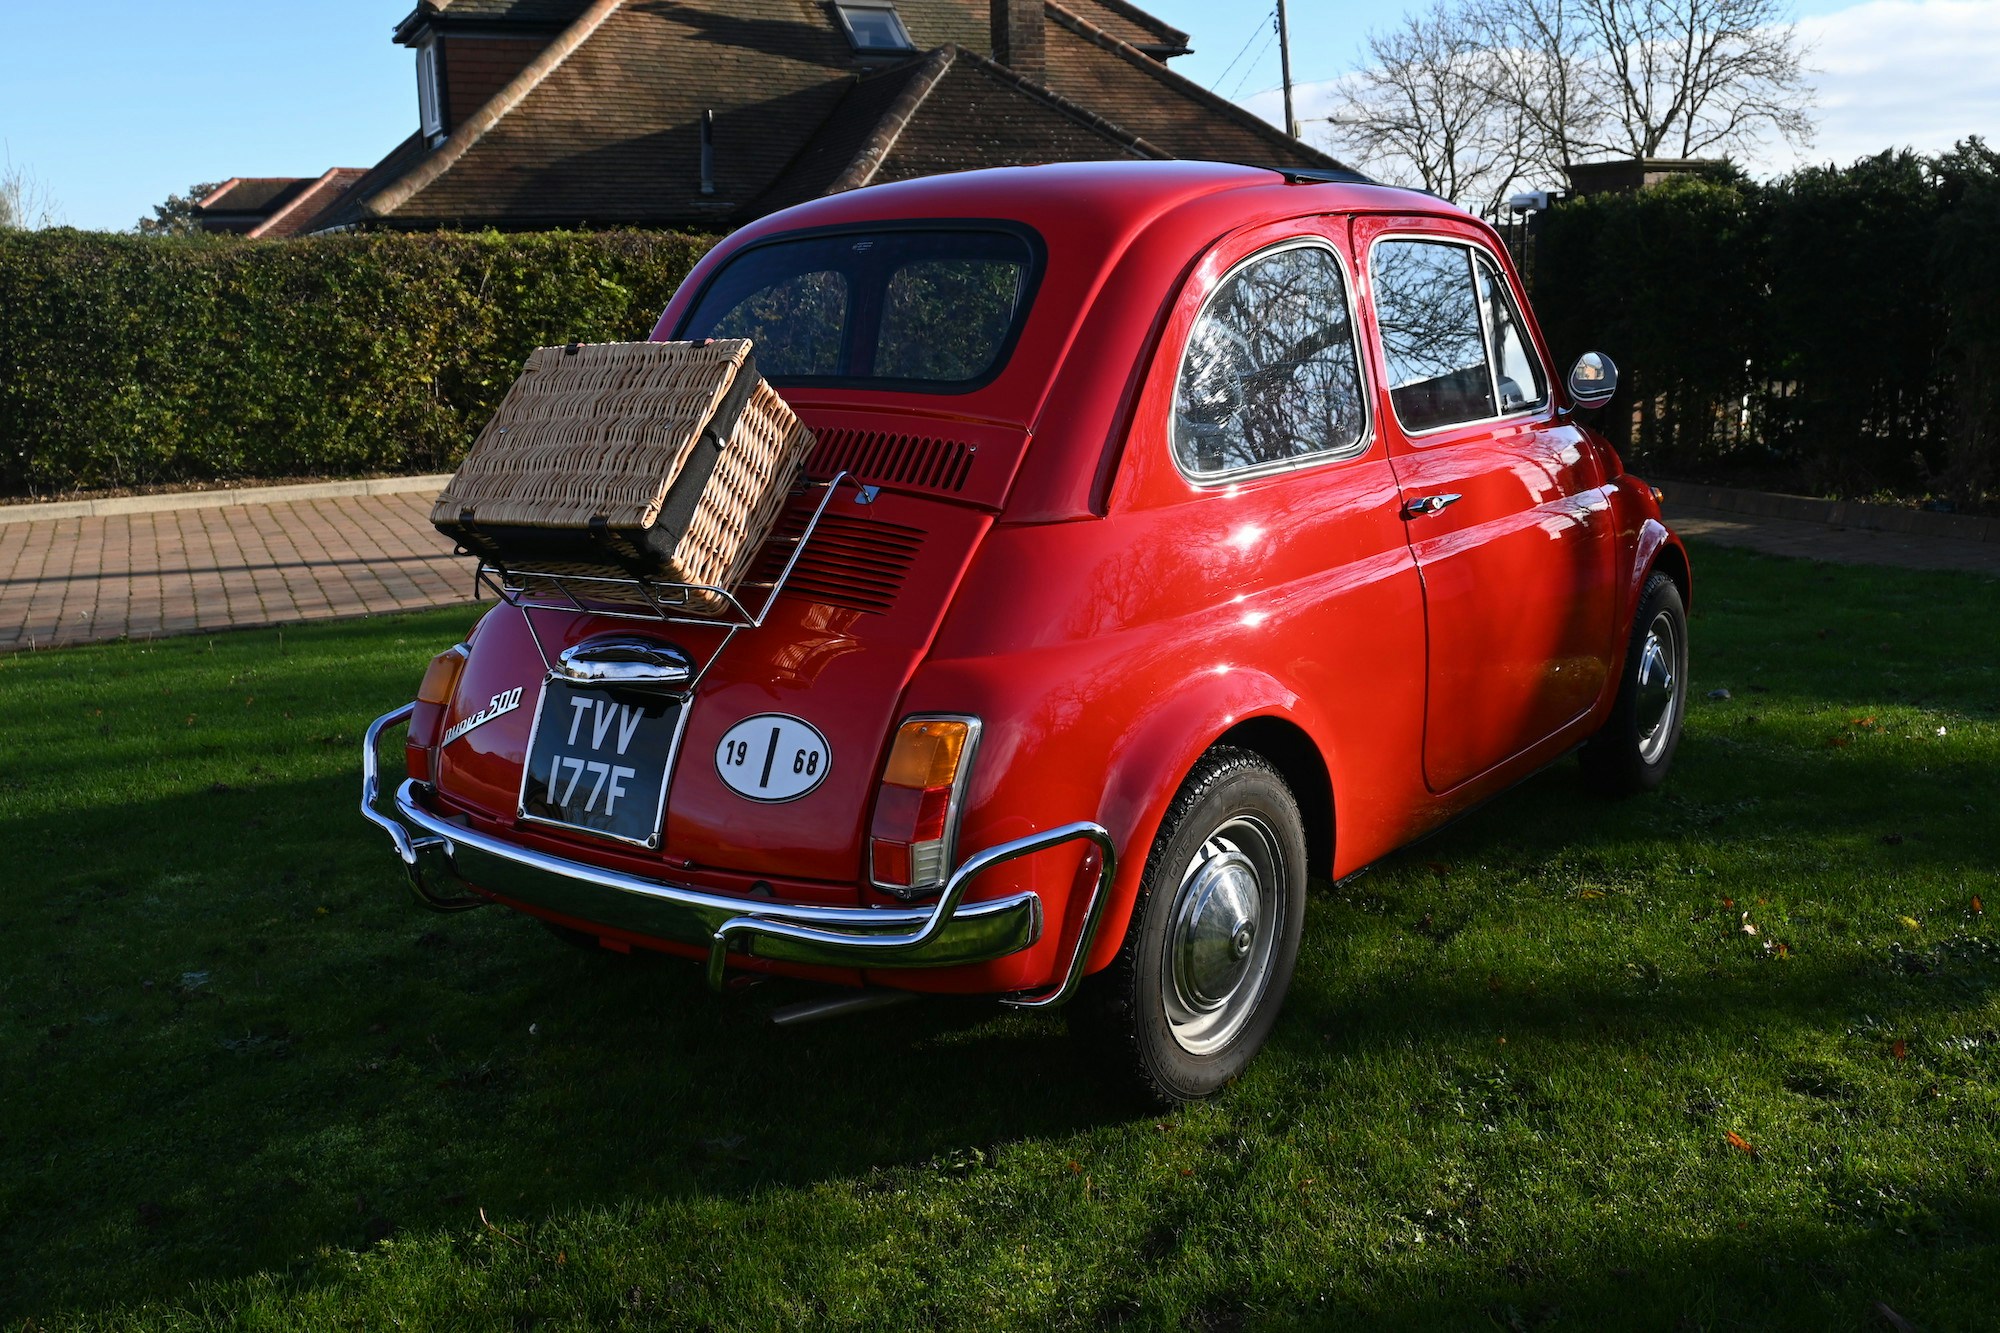 Classic Red Fiat 500 motor car with picnic basket parked on